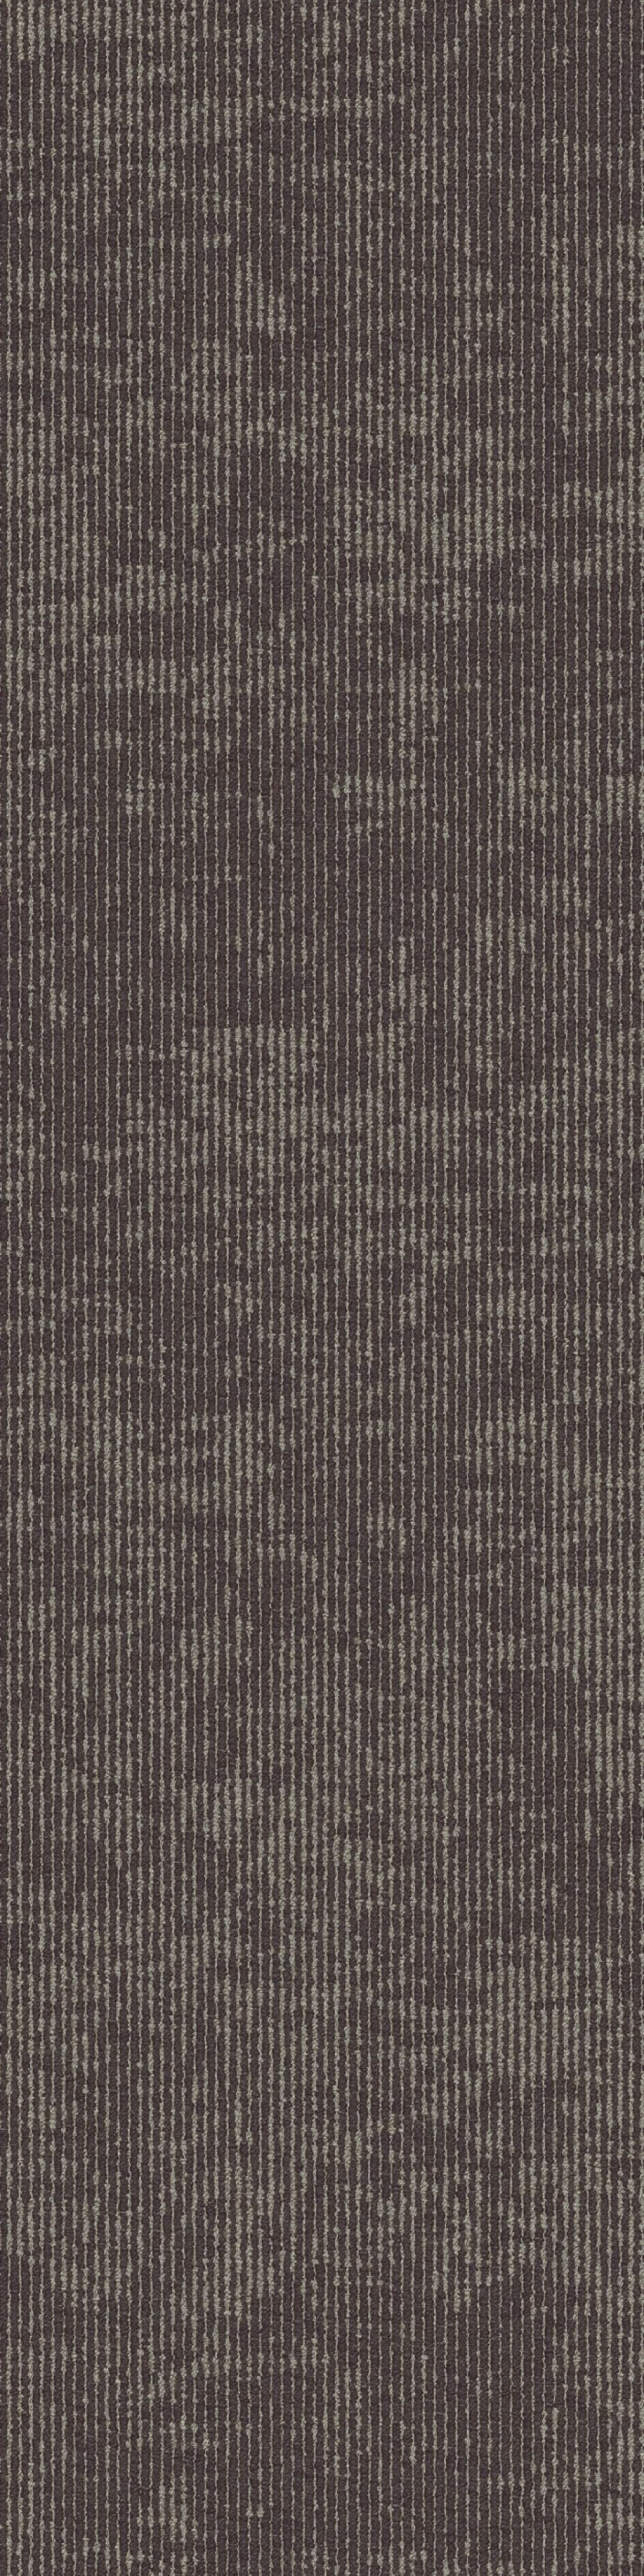 Embodied Beauty -  Tokyo texture - Taupe from Inzide